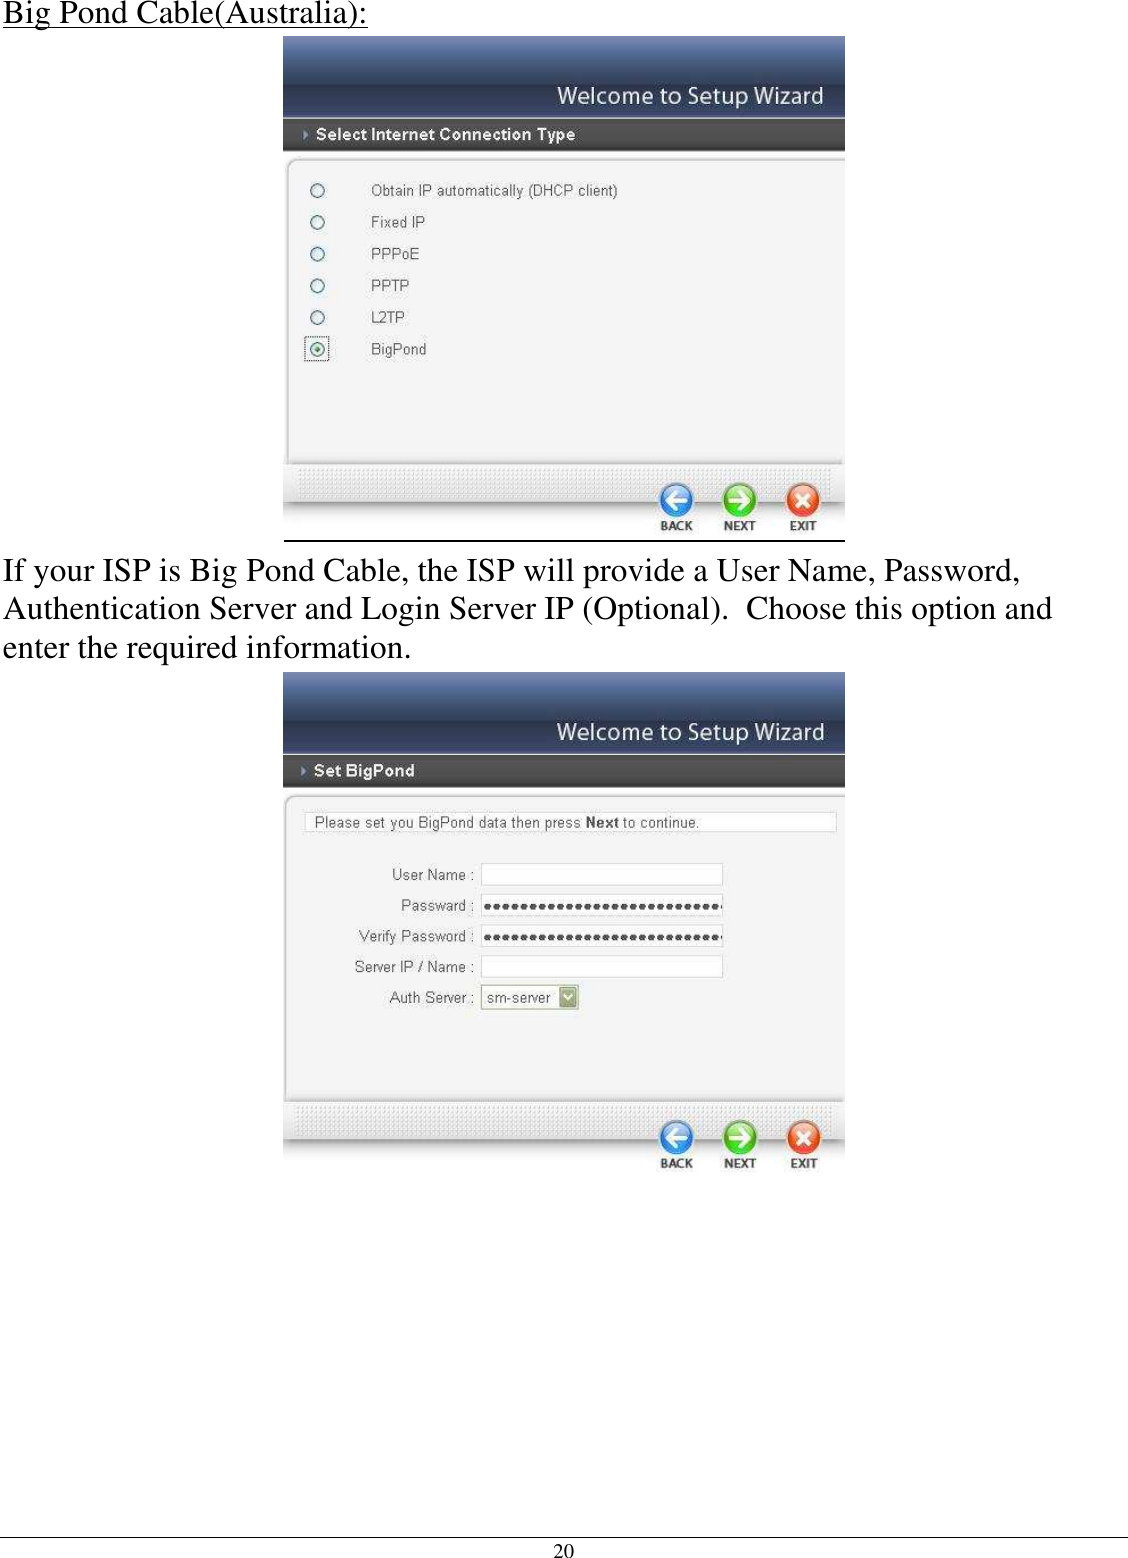 20 Big Pond Cable(Australia):  If your ISP is Big Pond Cable, the ISP will provide a User Name, Password, Authentication Server and Login Server IP (Optional).  Choose this option and enter the required information.  